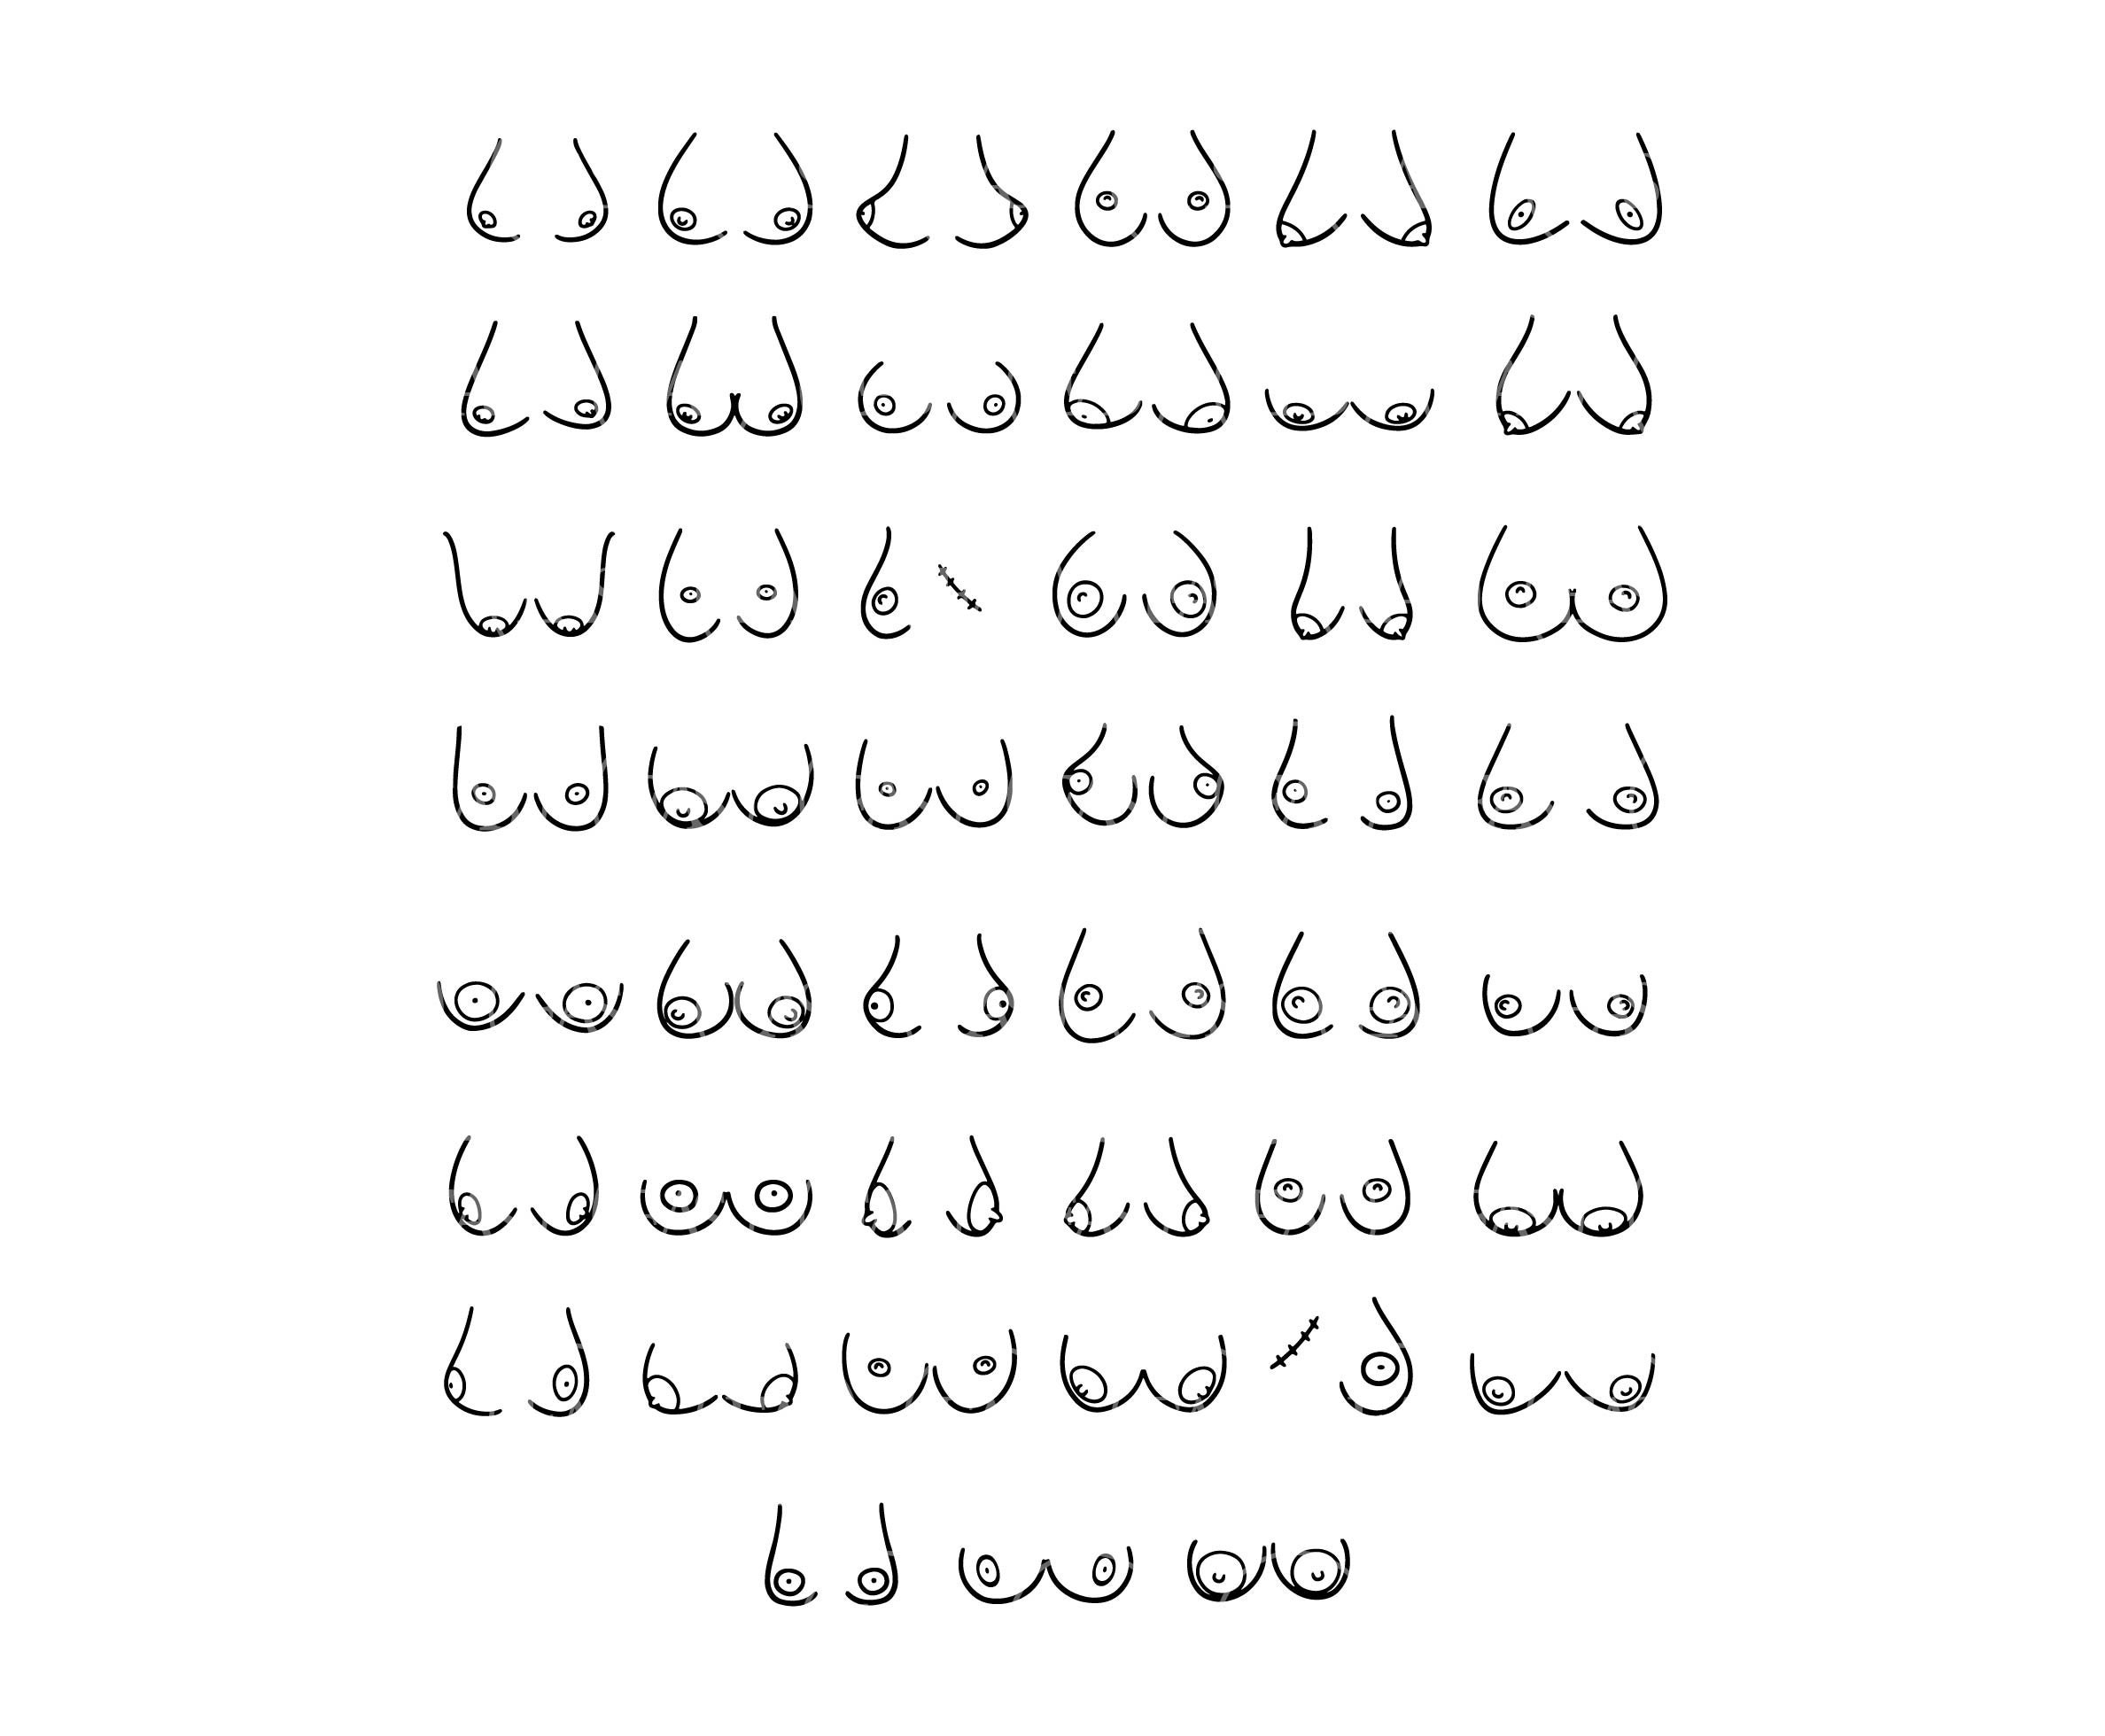 Hand Drawn Boobs Svg. Sketch Boobies Svg, Tits Svg. Vector Cut File for  Cricut, Silhouette, Sticker, Decal, Vinyl, Stencil, Pdf Png Dxf Eps. 